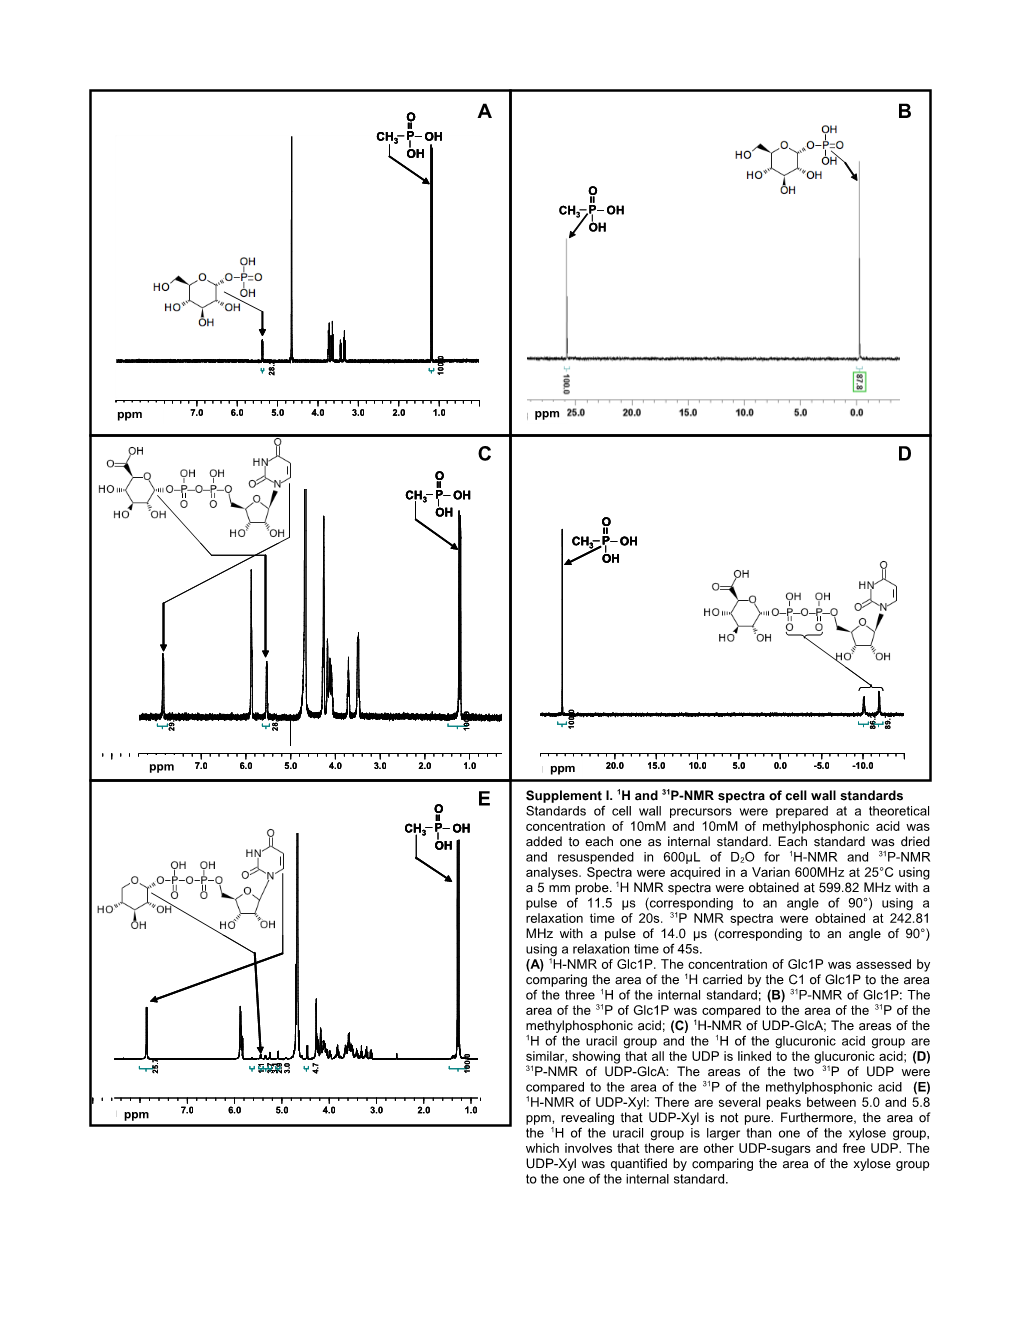 Supplement I. 1H and 31P-NMR Spectra of Cell Wall Standards